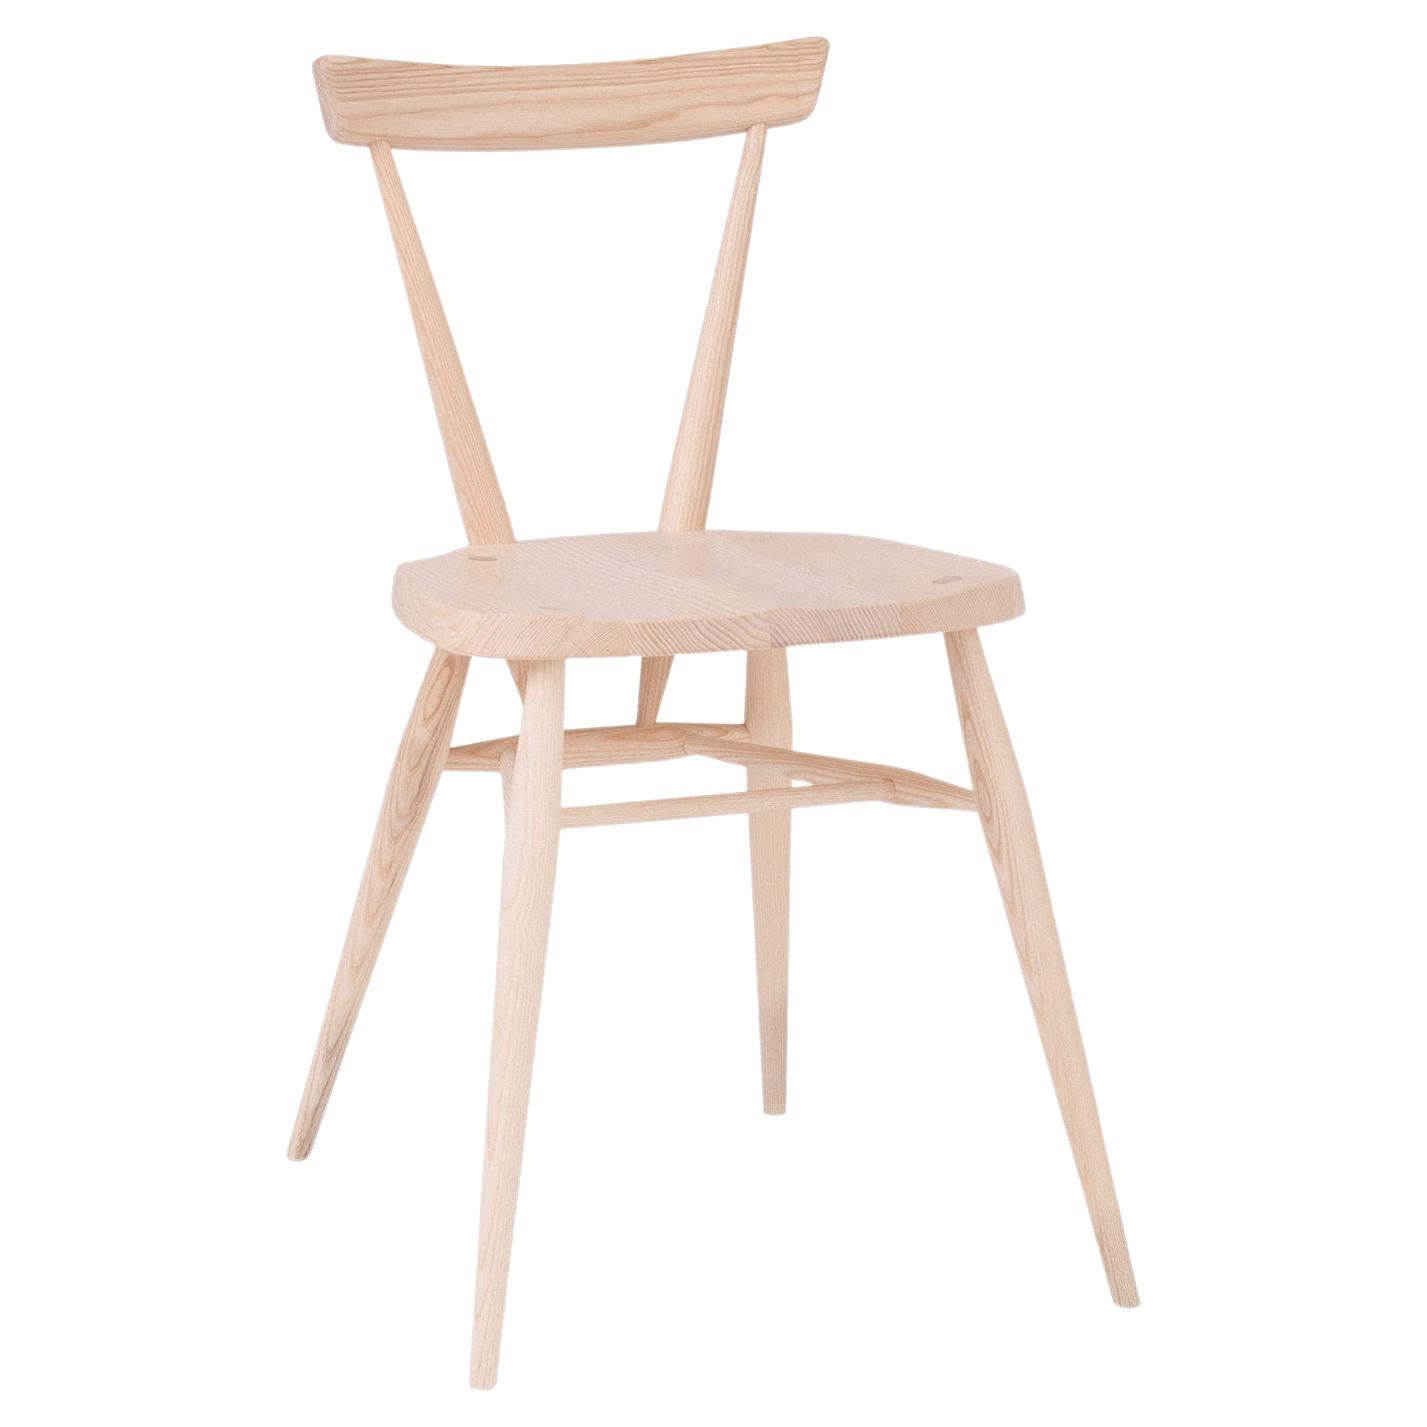 L.Ercolani Stacking Natural Chair Designed by Lucian R Ercolani in STOCK